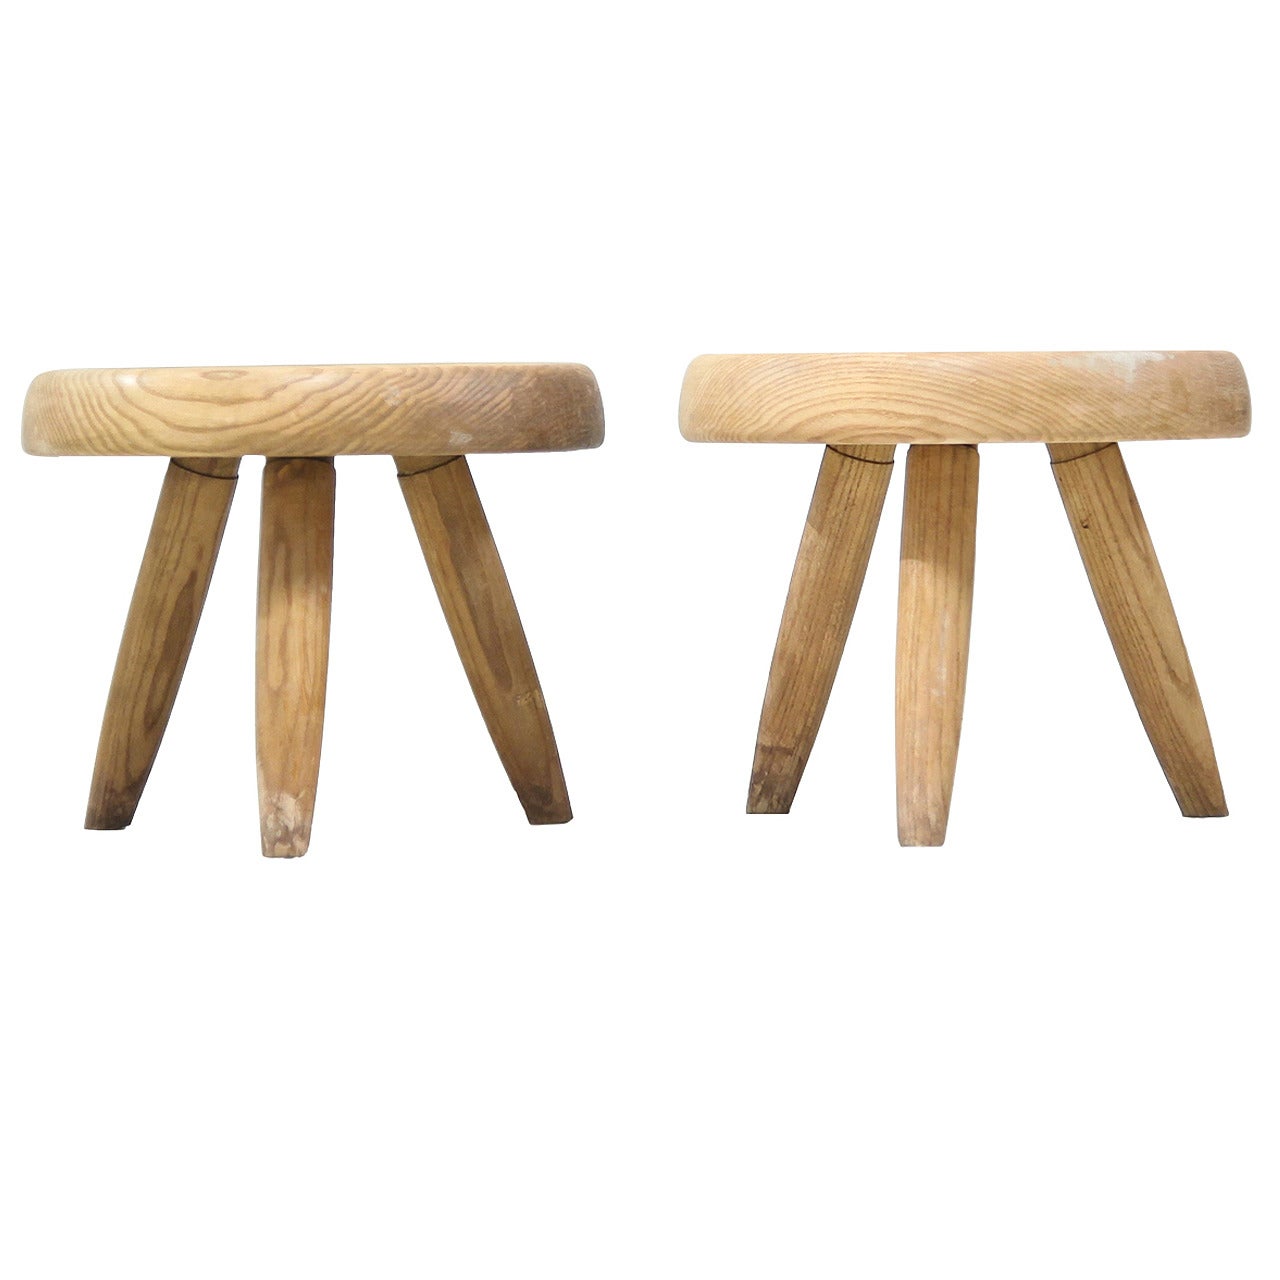 Pair of Charlotte Perriand Low Stools in Ash